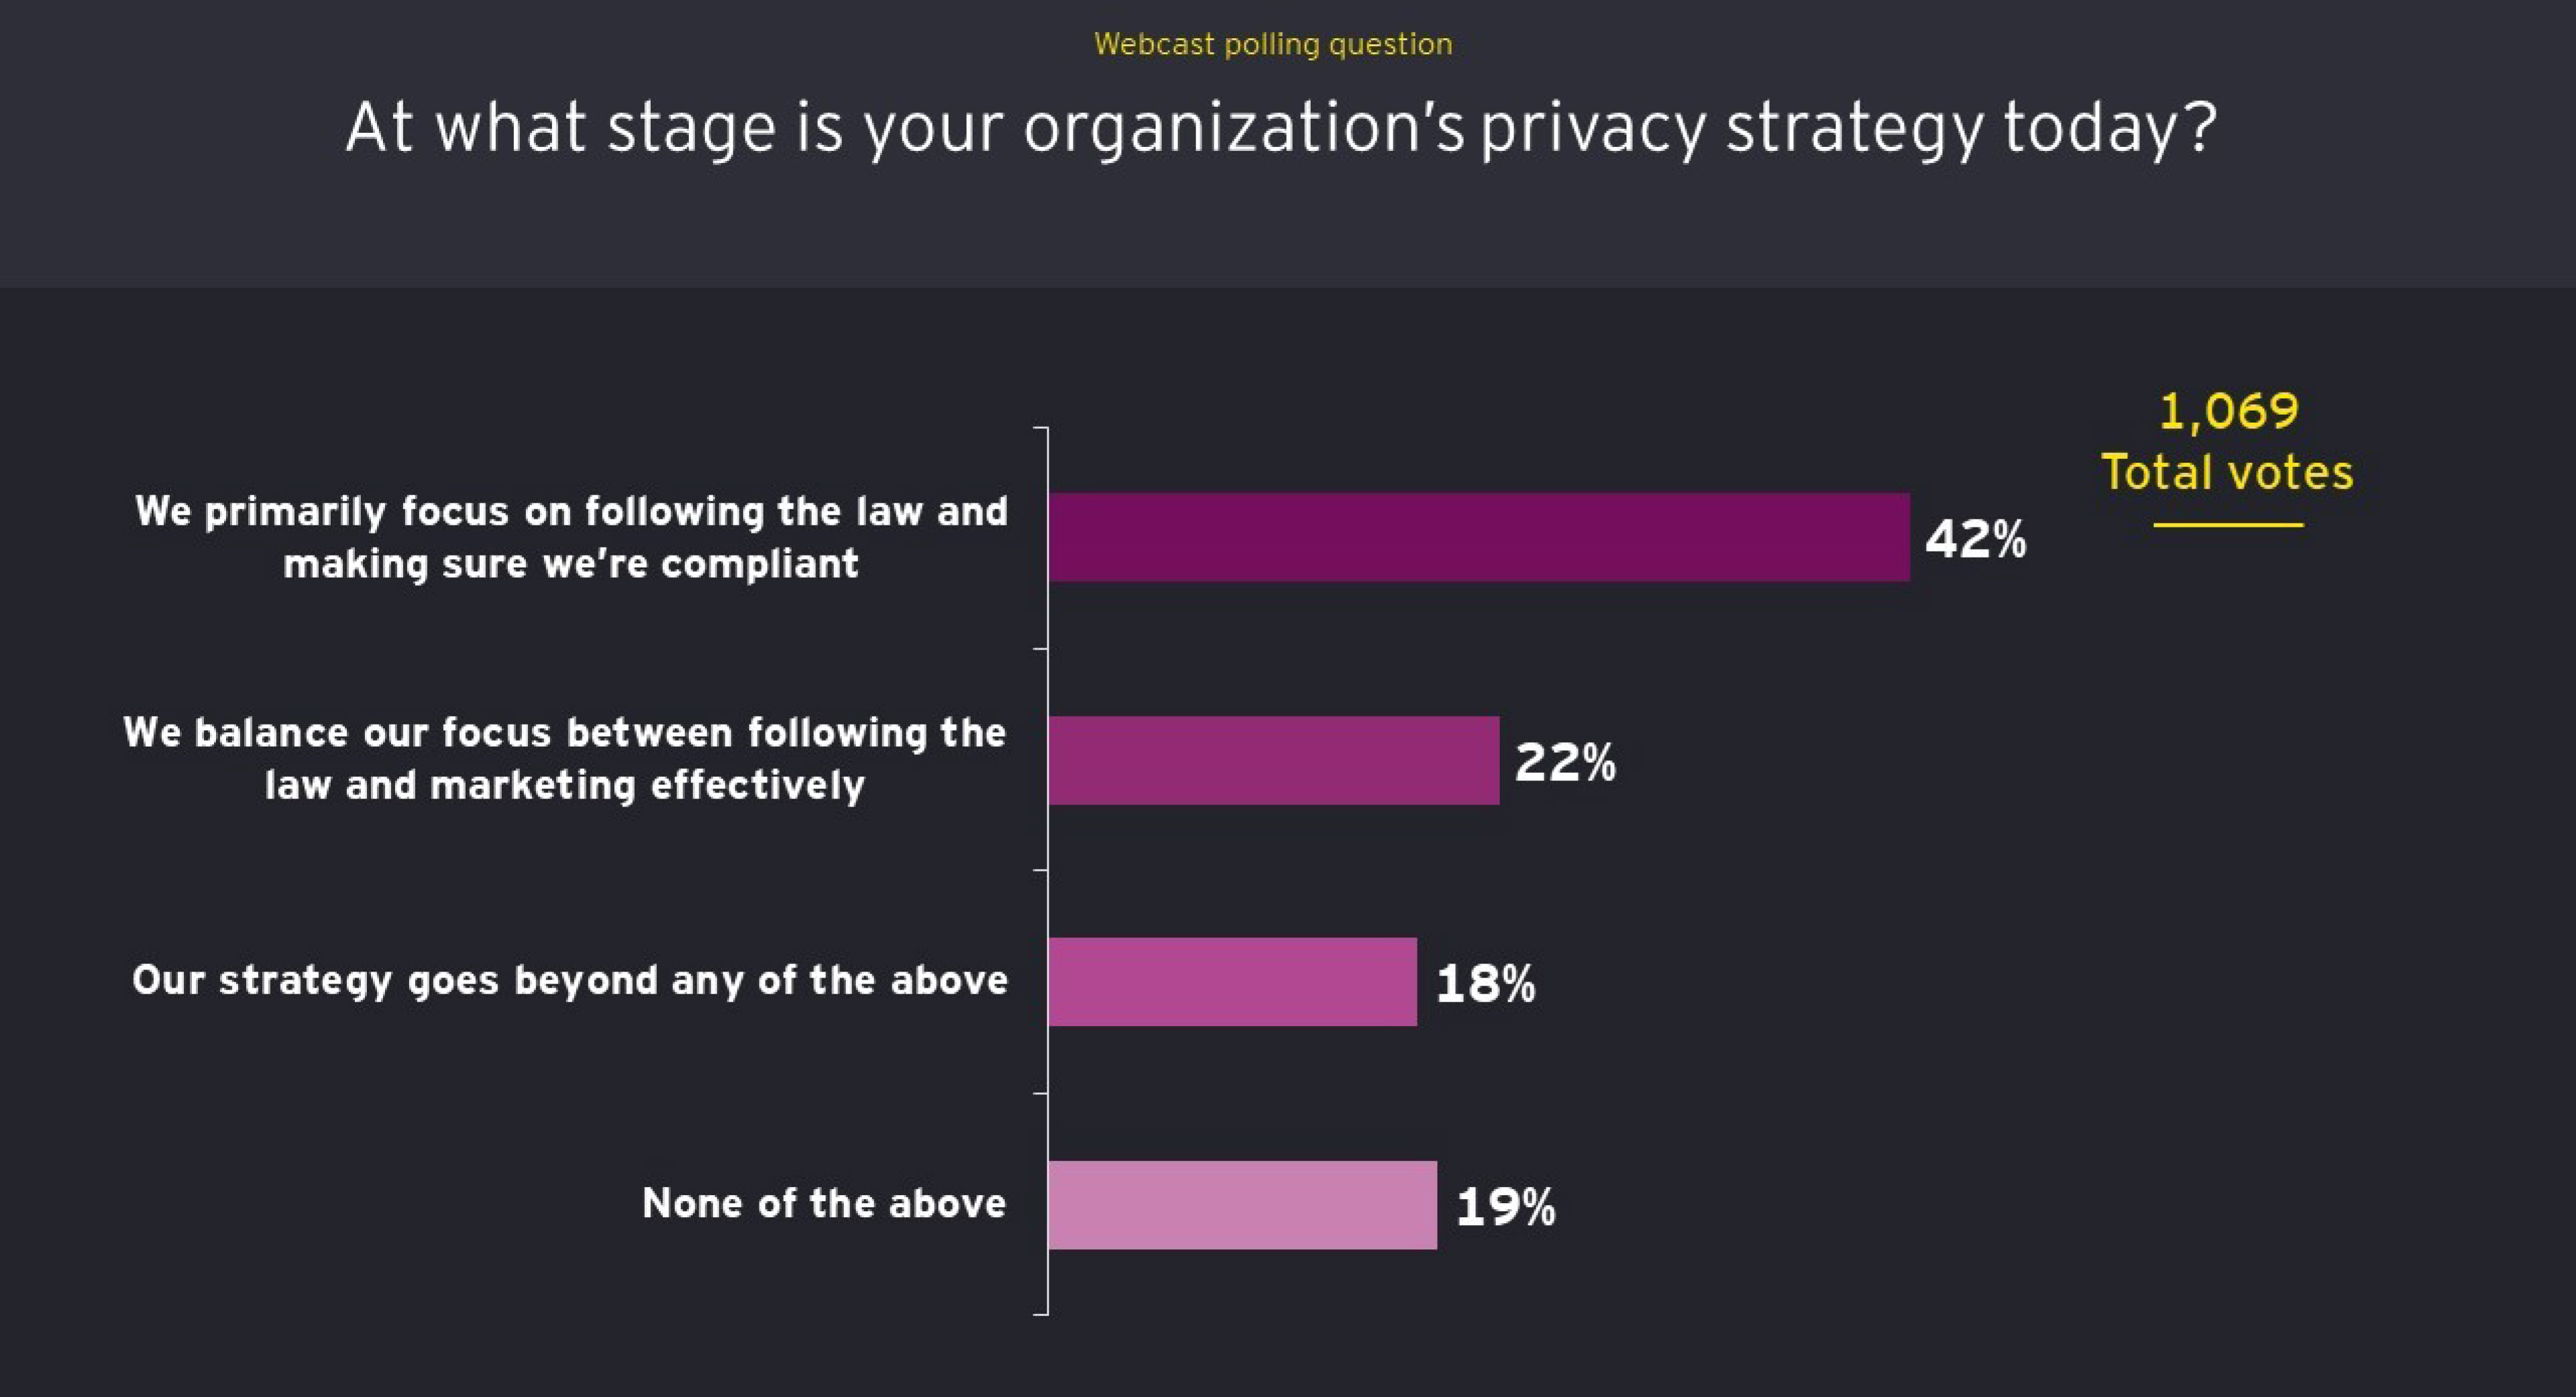 Consumer data privacy is about trust and transparency